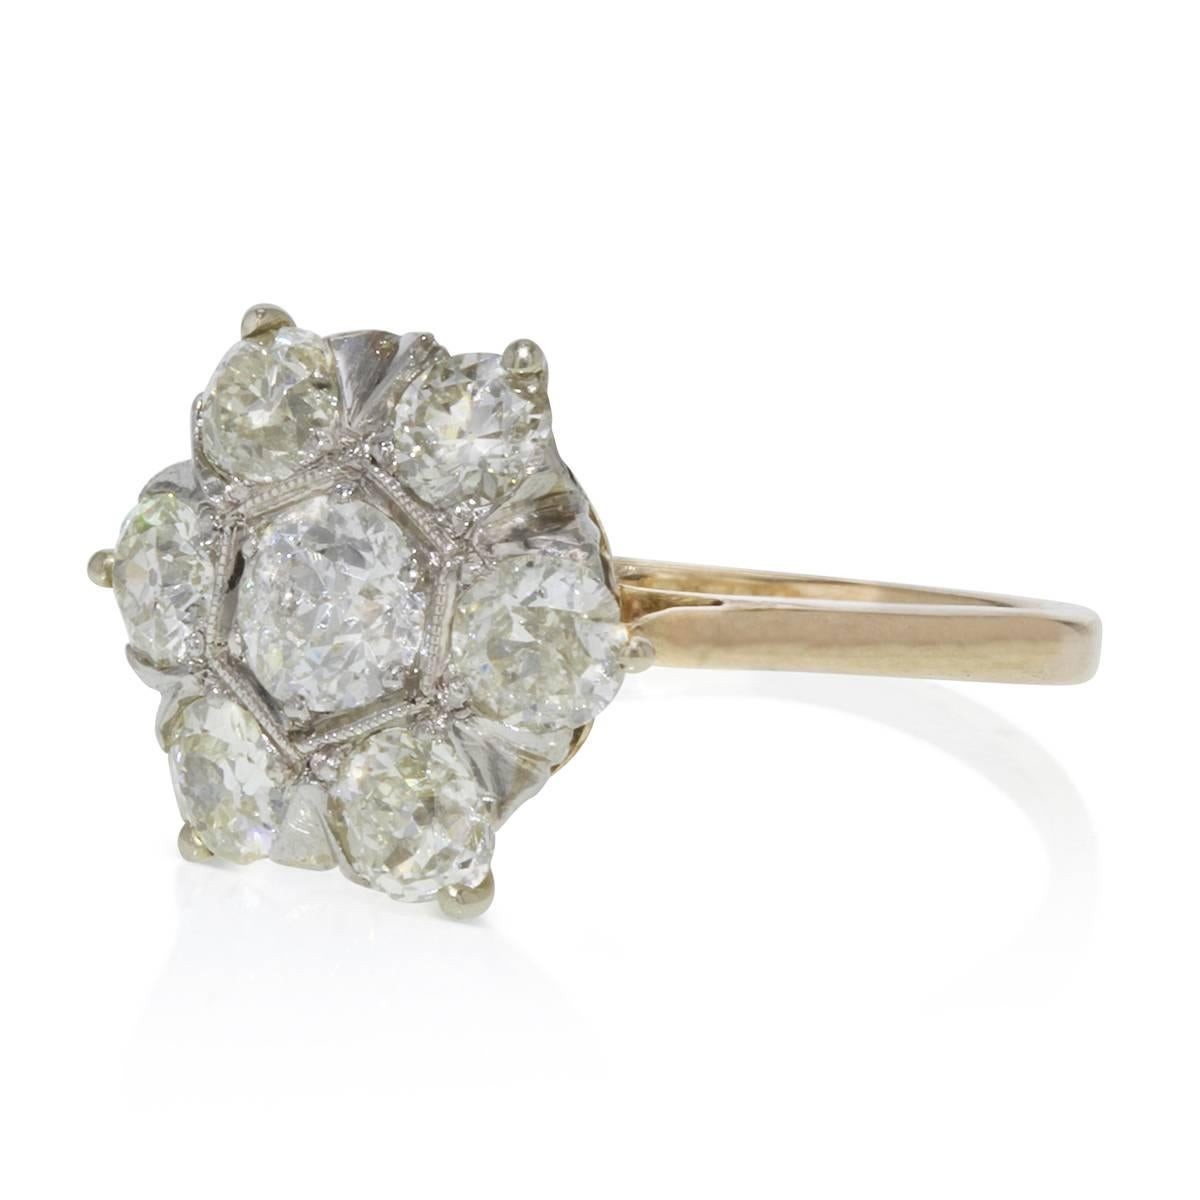 This relatively petite cluster or flower ring works beautifully as a somewhat unconventional engagement ring. Seven bright-white old minor sparklers, set in platinum adorned by milgrain edging on a yellow gold shank, join forces to create this